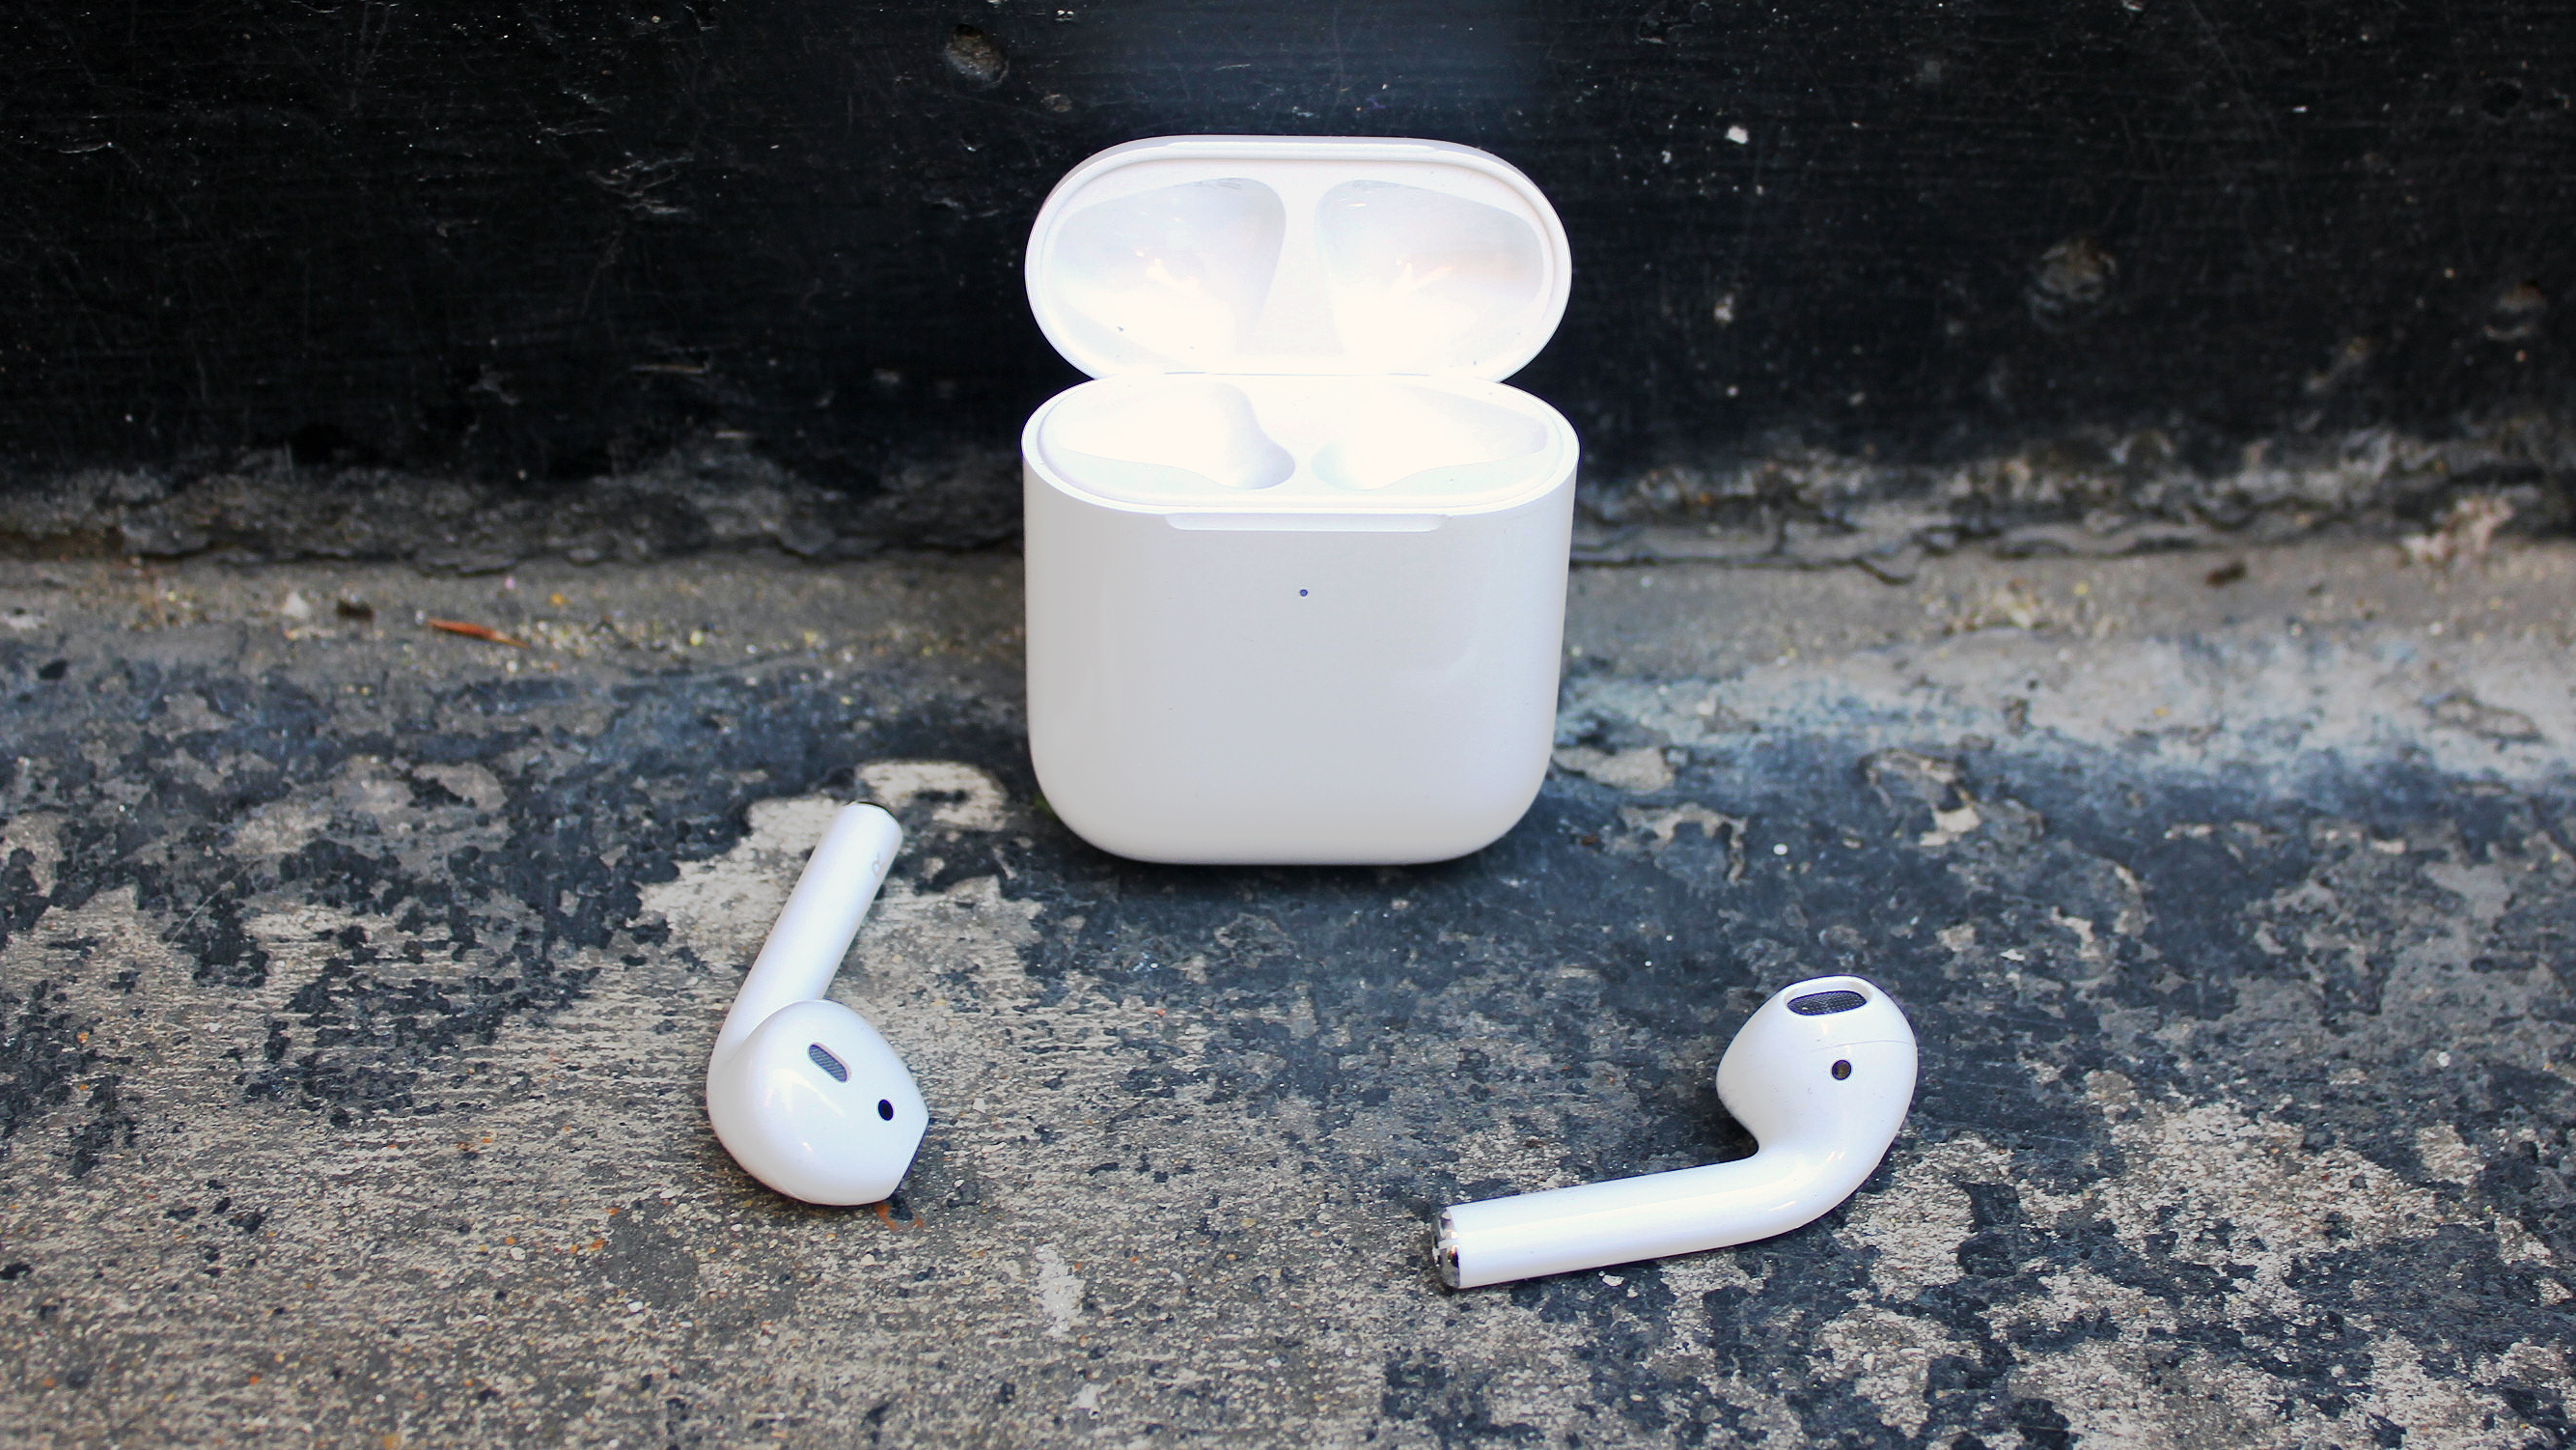 the airpods 2019 with their charging case